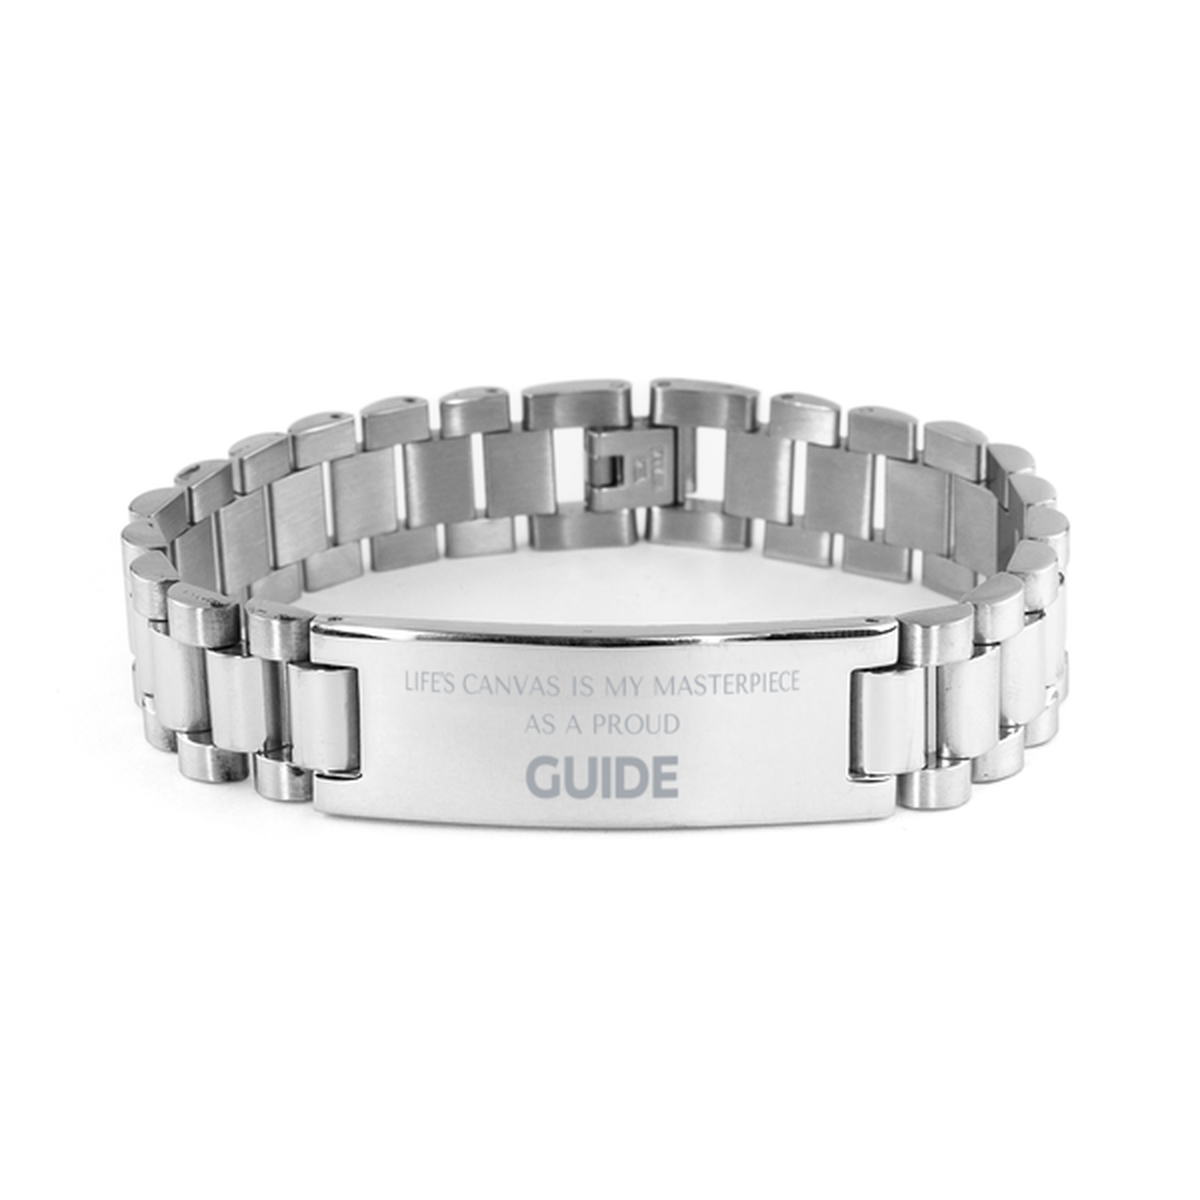 Proud Guide Gifts, Life's canvas is my masterpiece, Epic Birthday Christmas Unique Ladder Stainless Steel Bracelet For Guide, Coworkers, Men, Women, Friends